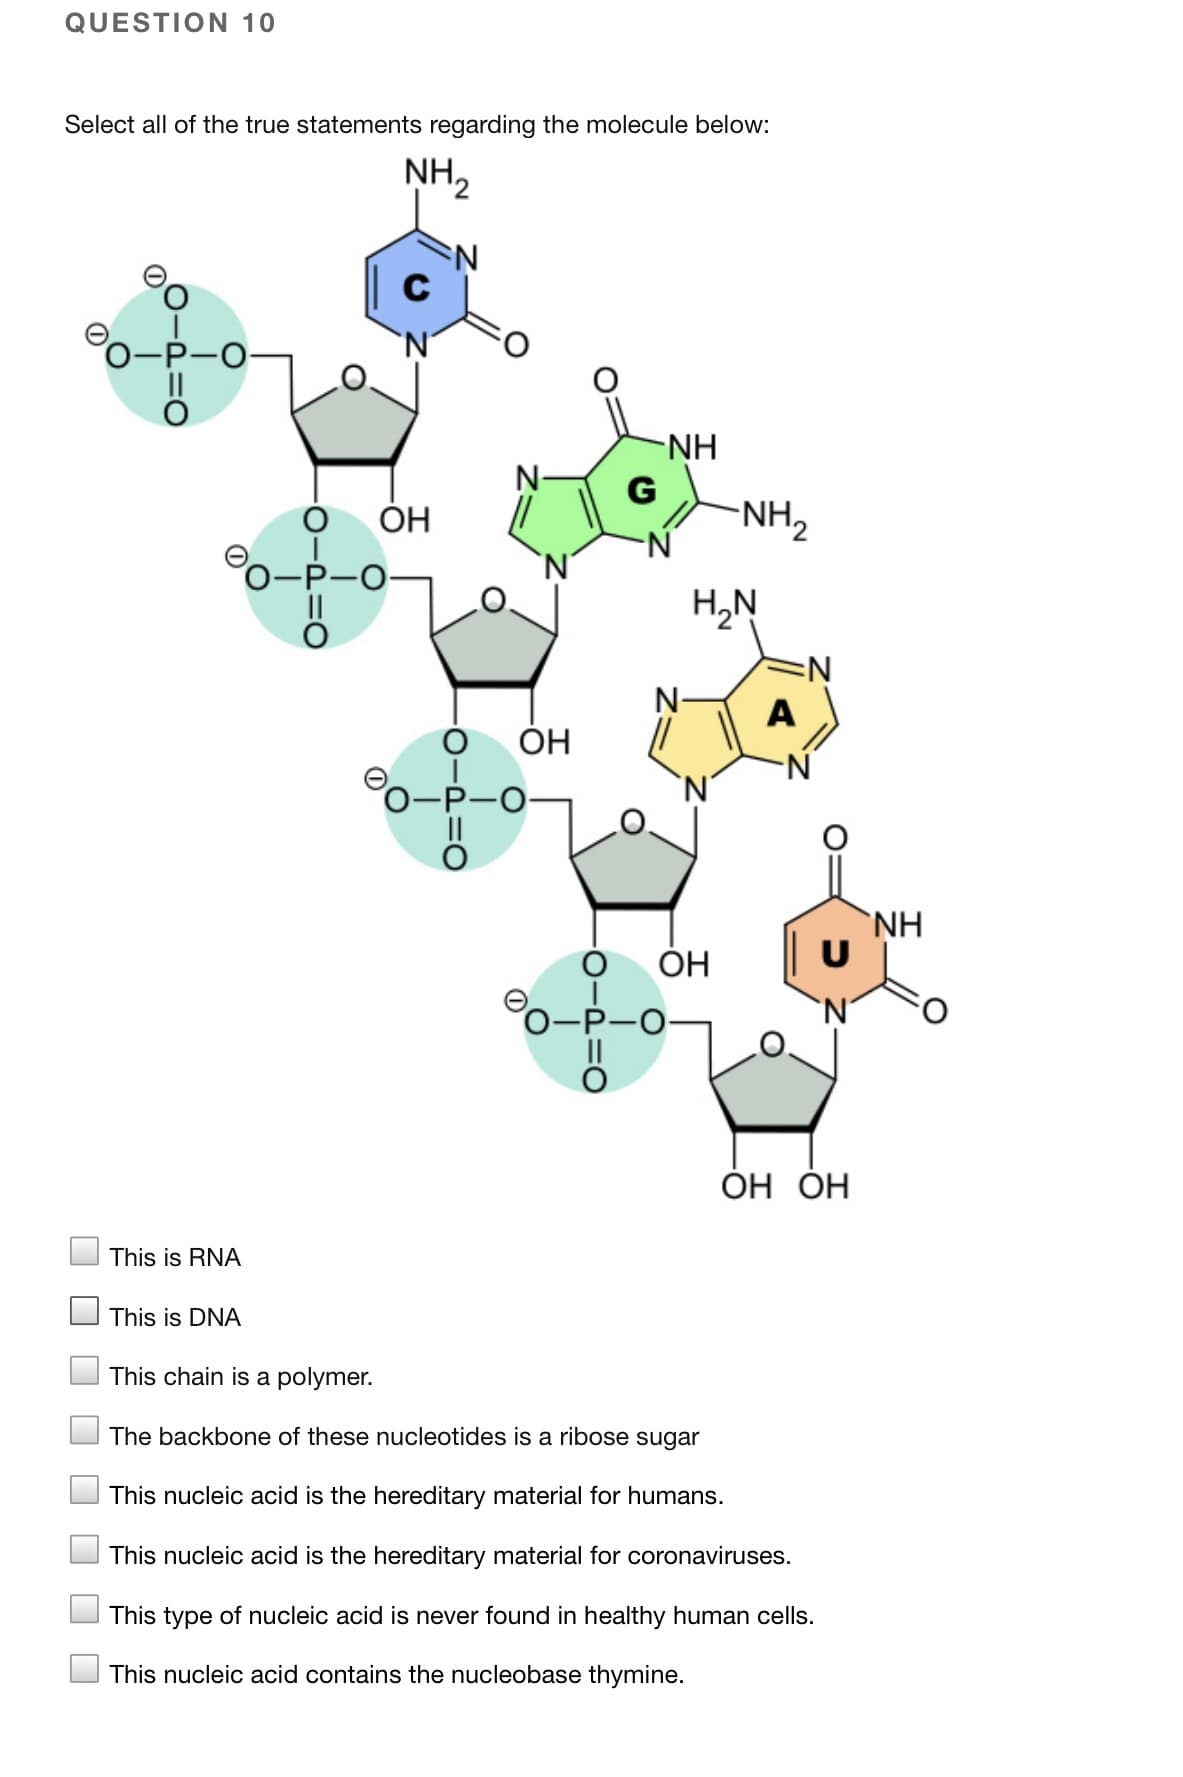 QUESTION 10
Select all of the true statements regarding the molecule below:
NH,
-P-O
NH
G
OH
NH,
О-Р-О-
H,N
N-
A
ОН
-P-O
`NH
U
ОН
0-P-O-
N'
ОН ОН
This is RNA
This is DNA
This chain is a polymer.
The backbone of these nucleotides is a ribose sugar
This nucleic acid is the hereditary material for humans.
This nucleic acid is the hereditary material for coronaviruses.
This type of nucleic acid is never found in healthy human cells.
This nucleic acid contains the nucleobase thymine.
